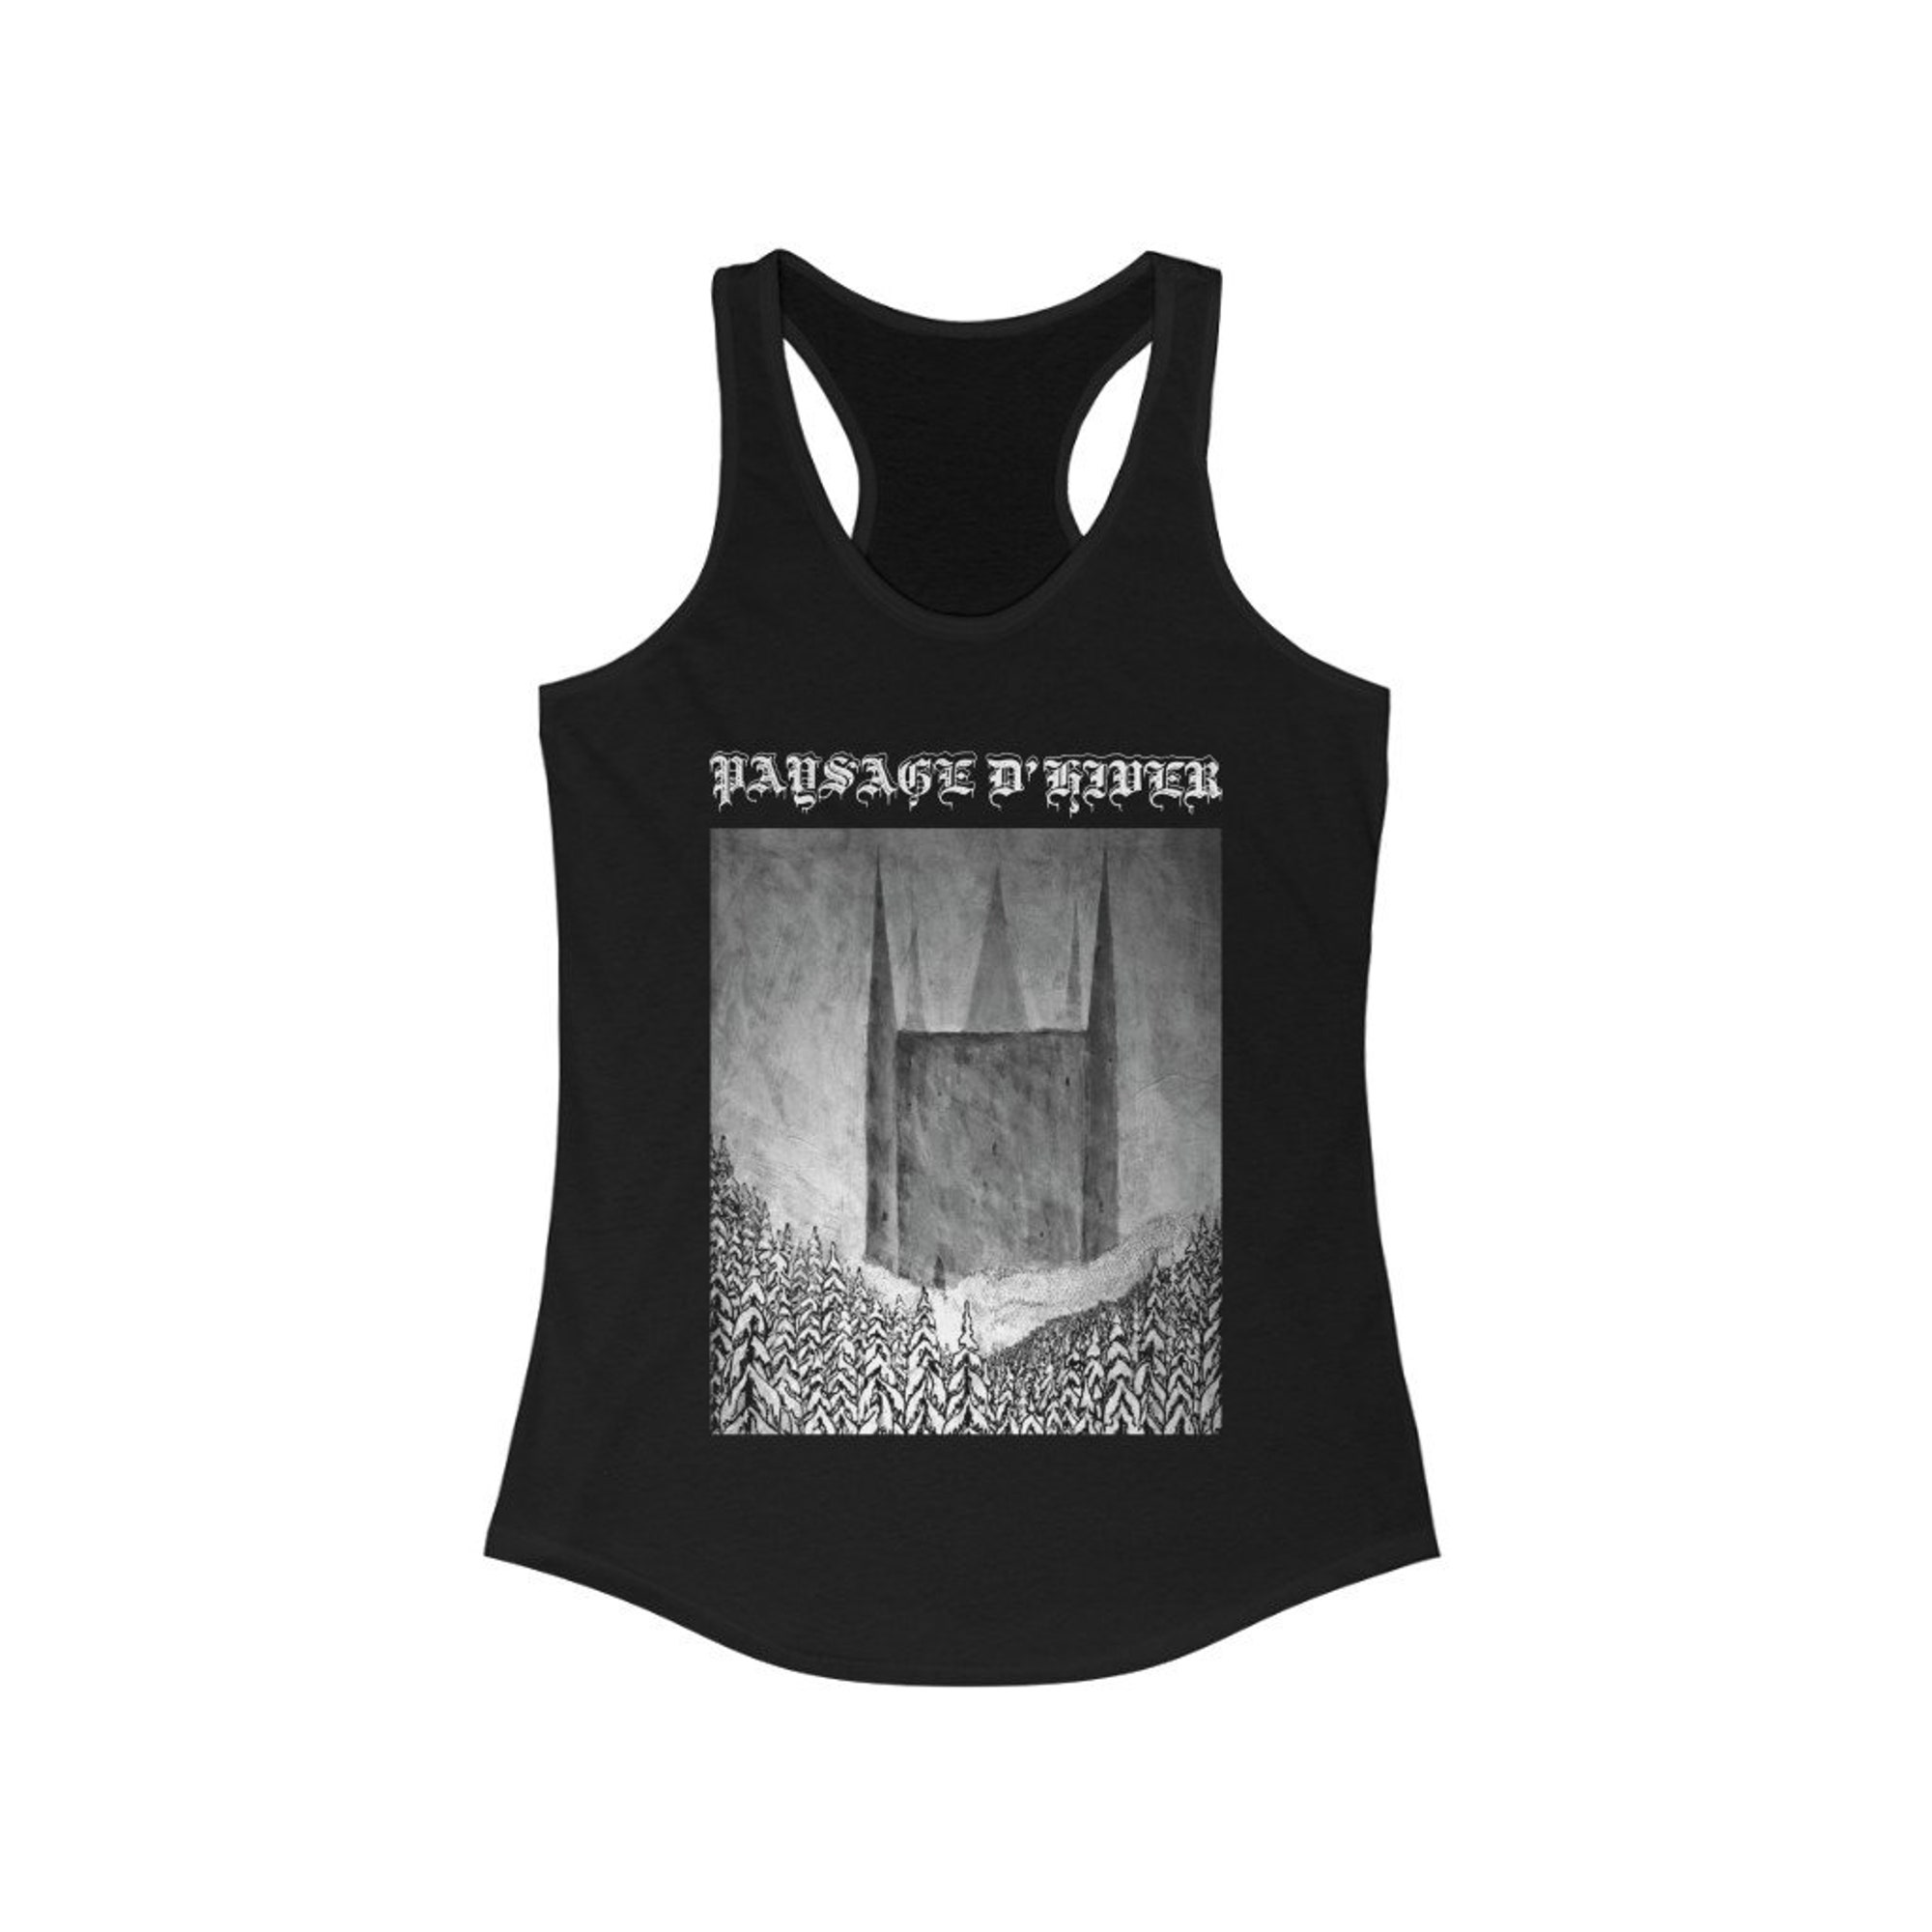 Discover Paysage d'Hiver Womens Tank Top, Ladies Paysage d'Hiver Tank Top